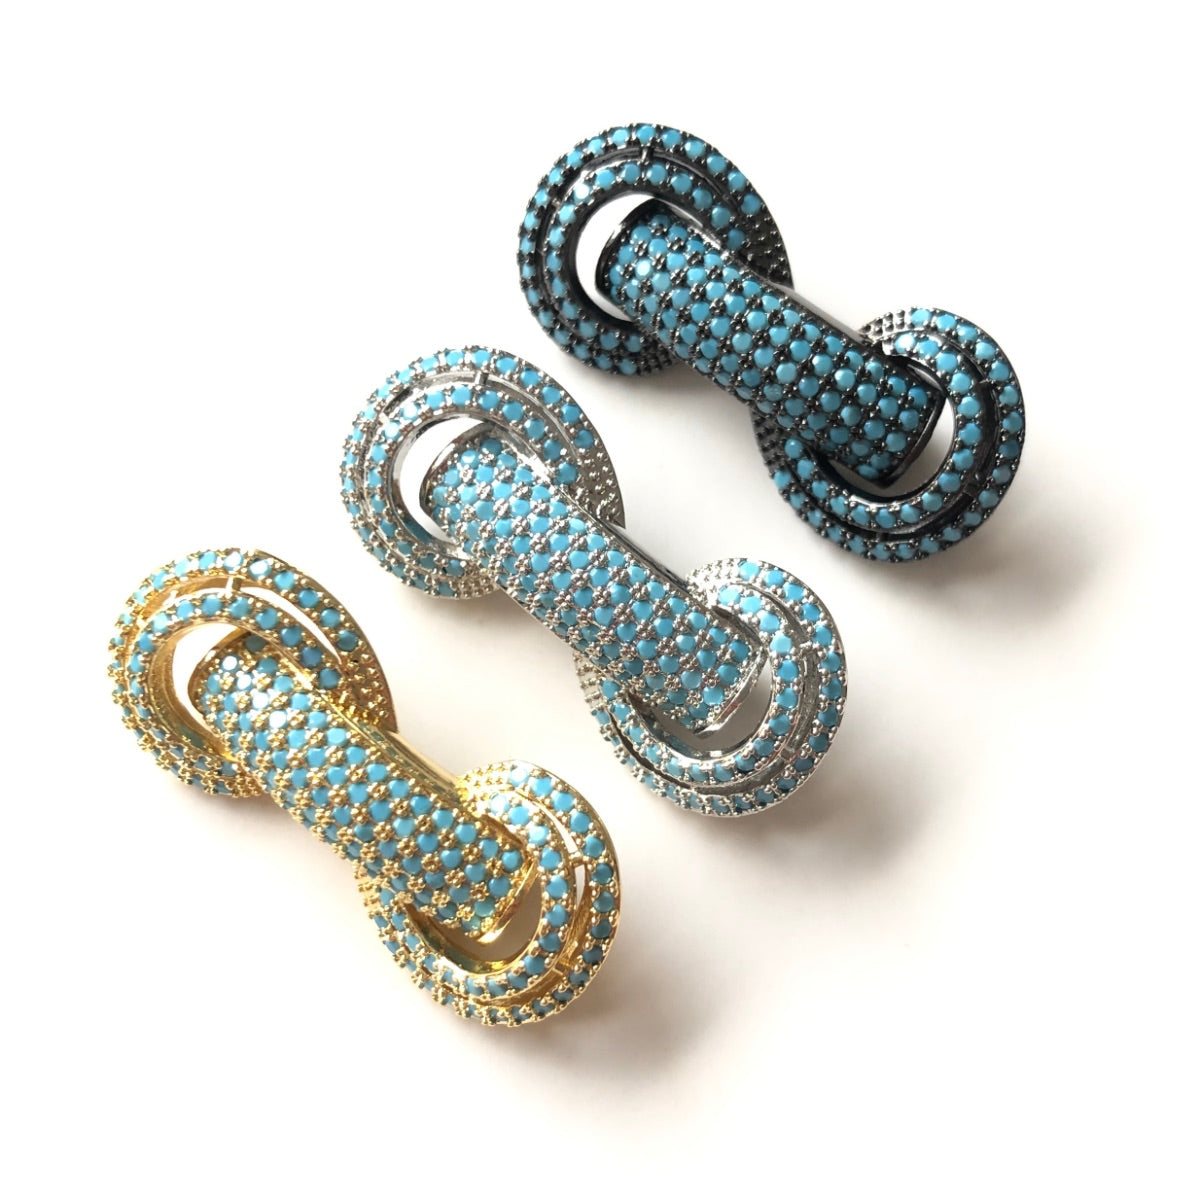 5pcs/lot 31*14.5*8mm Turquoise CZ Paved Tube Bar Spacers CZ Paved Spacers Colorful Zirconia New Spacers Arrivals Tube Bar Centerpieces Charms Beads Beyond